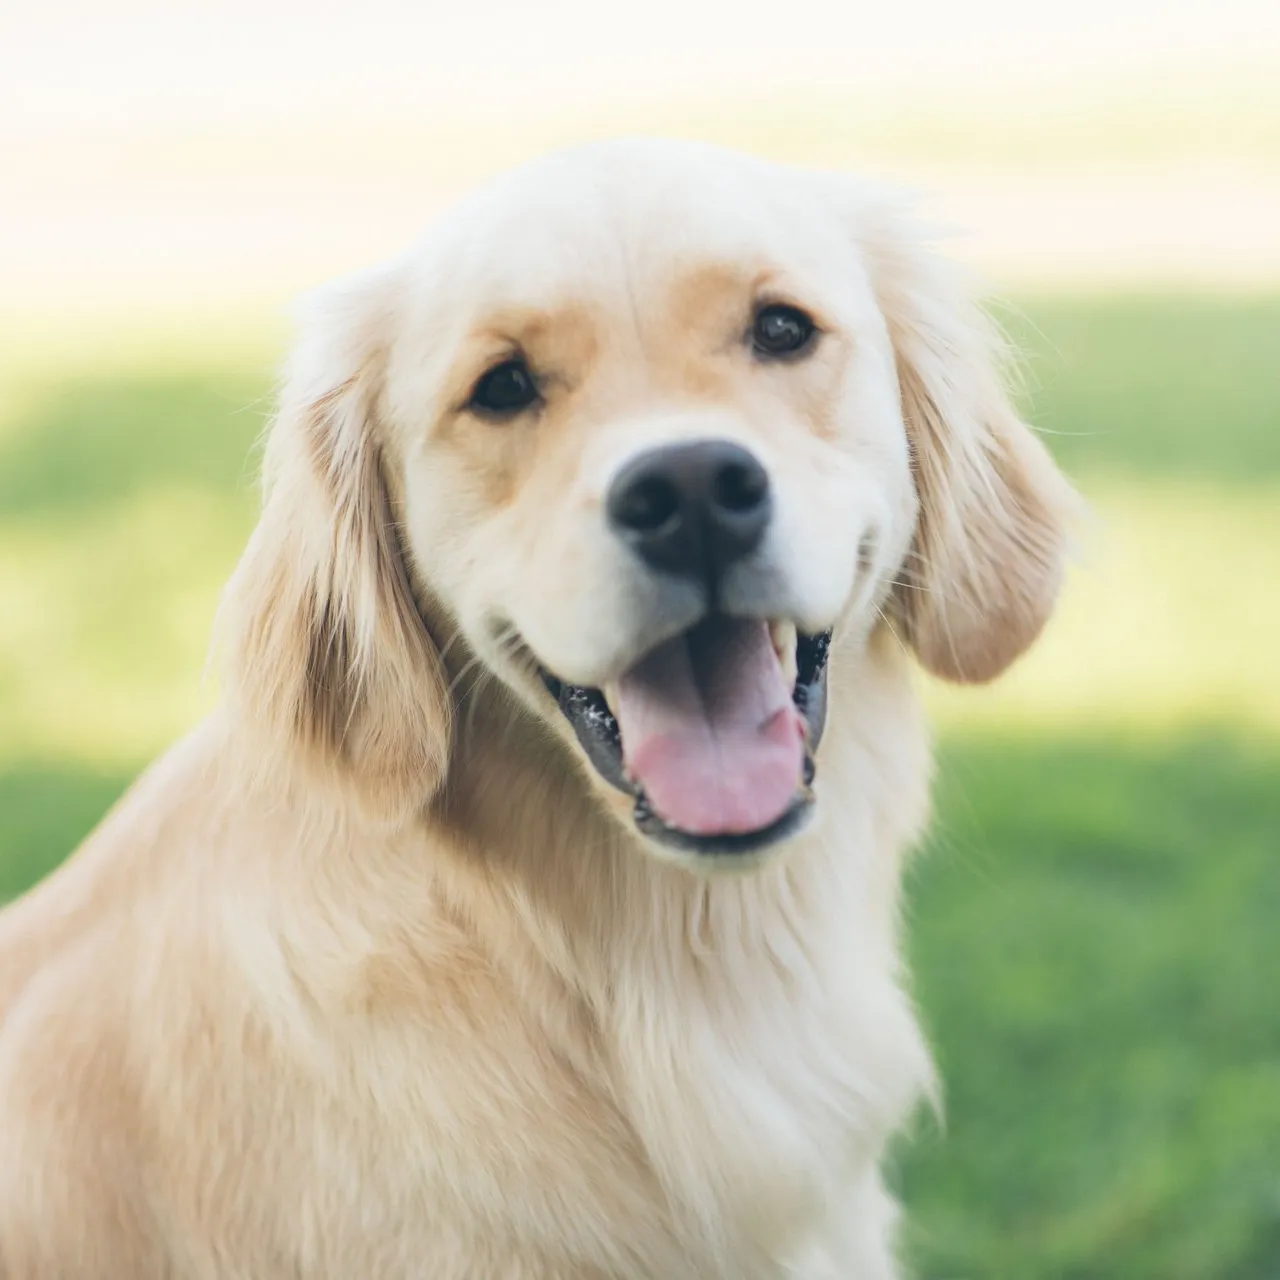 Golden retriever dog smiling while sitting on grass